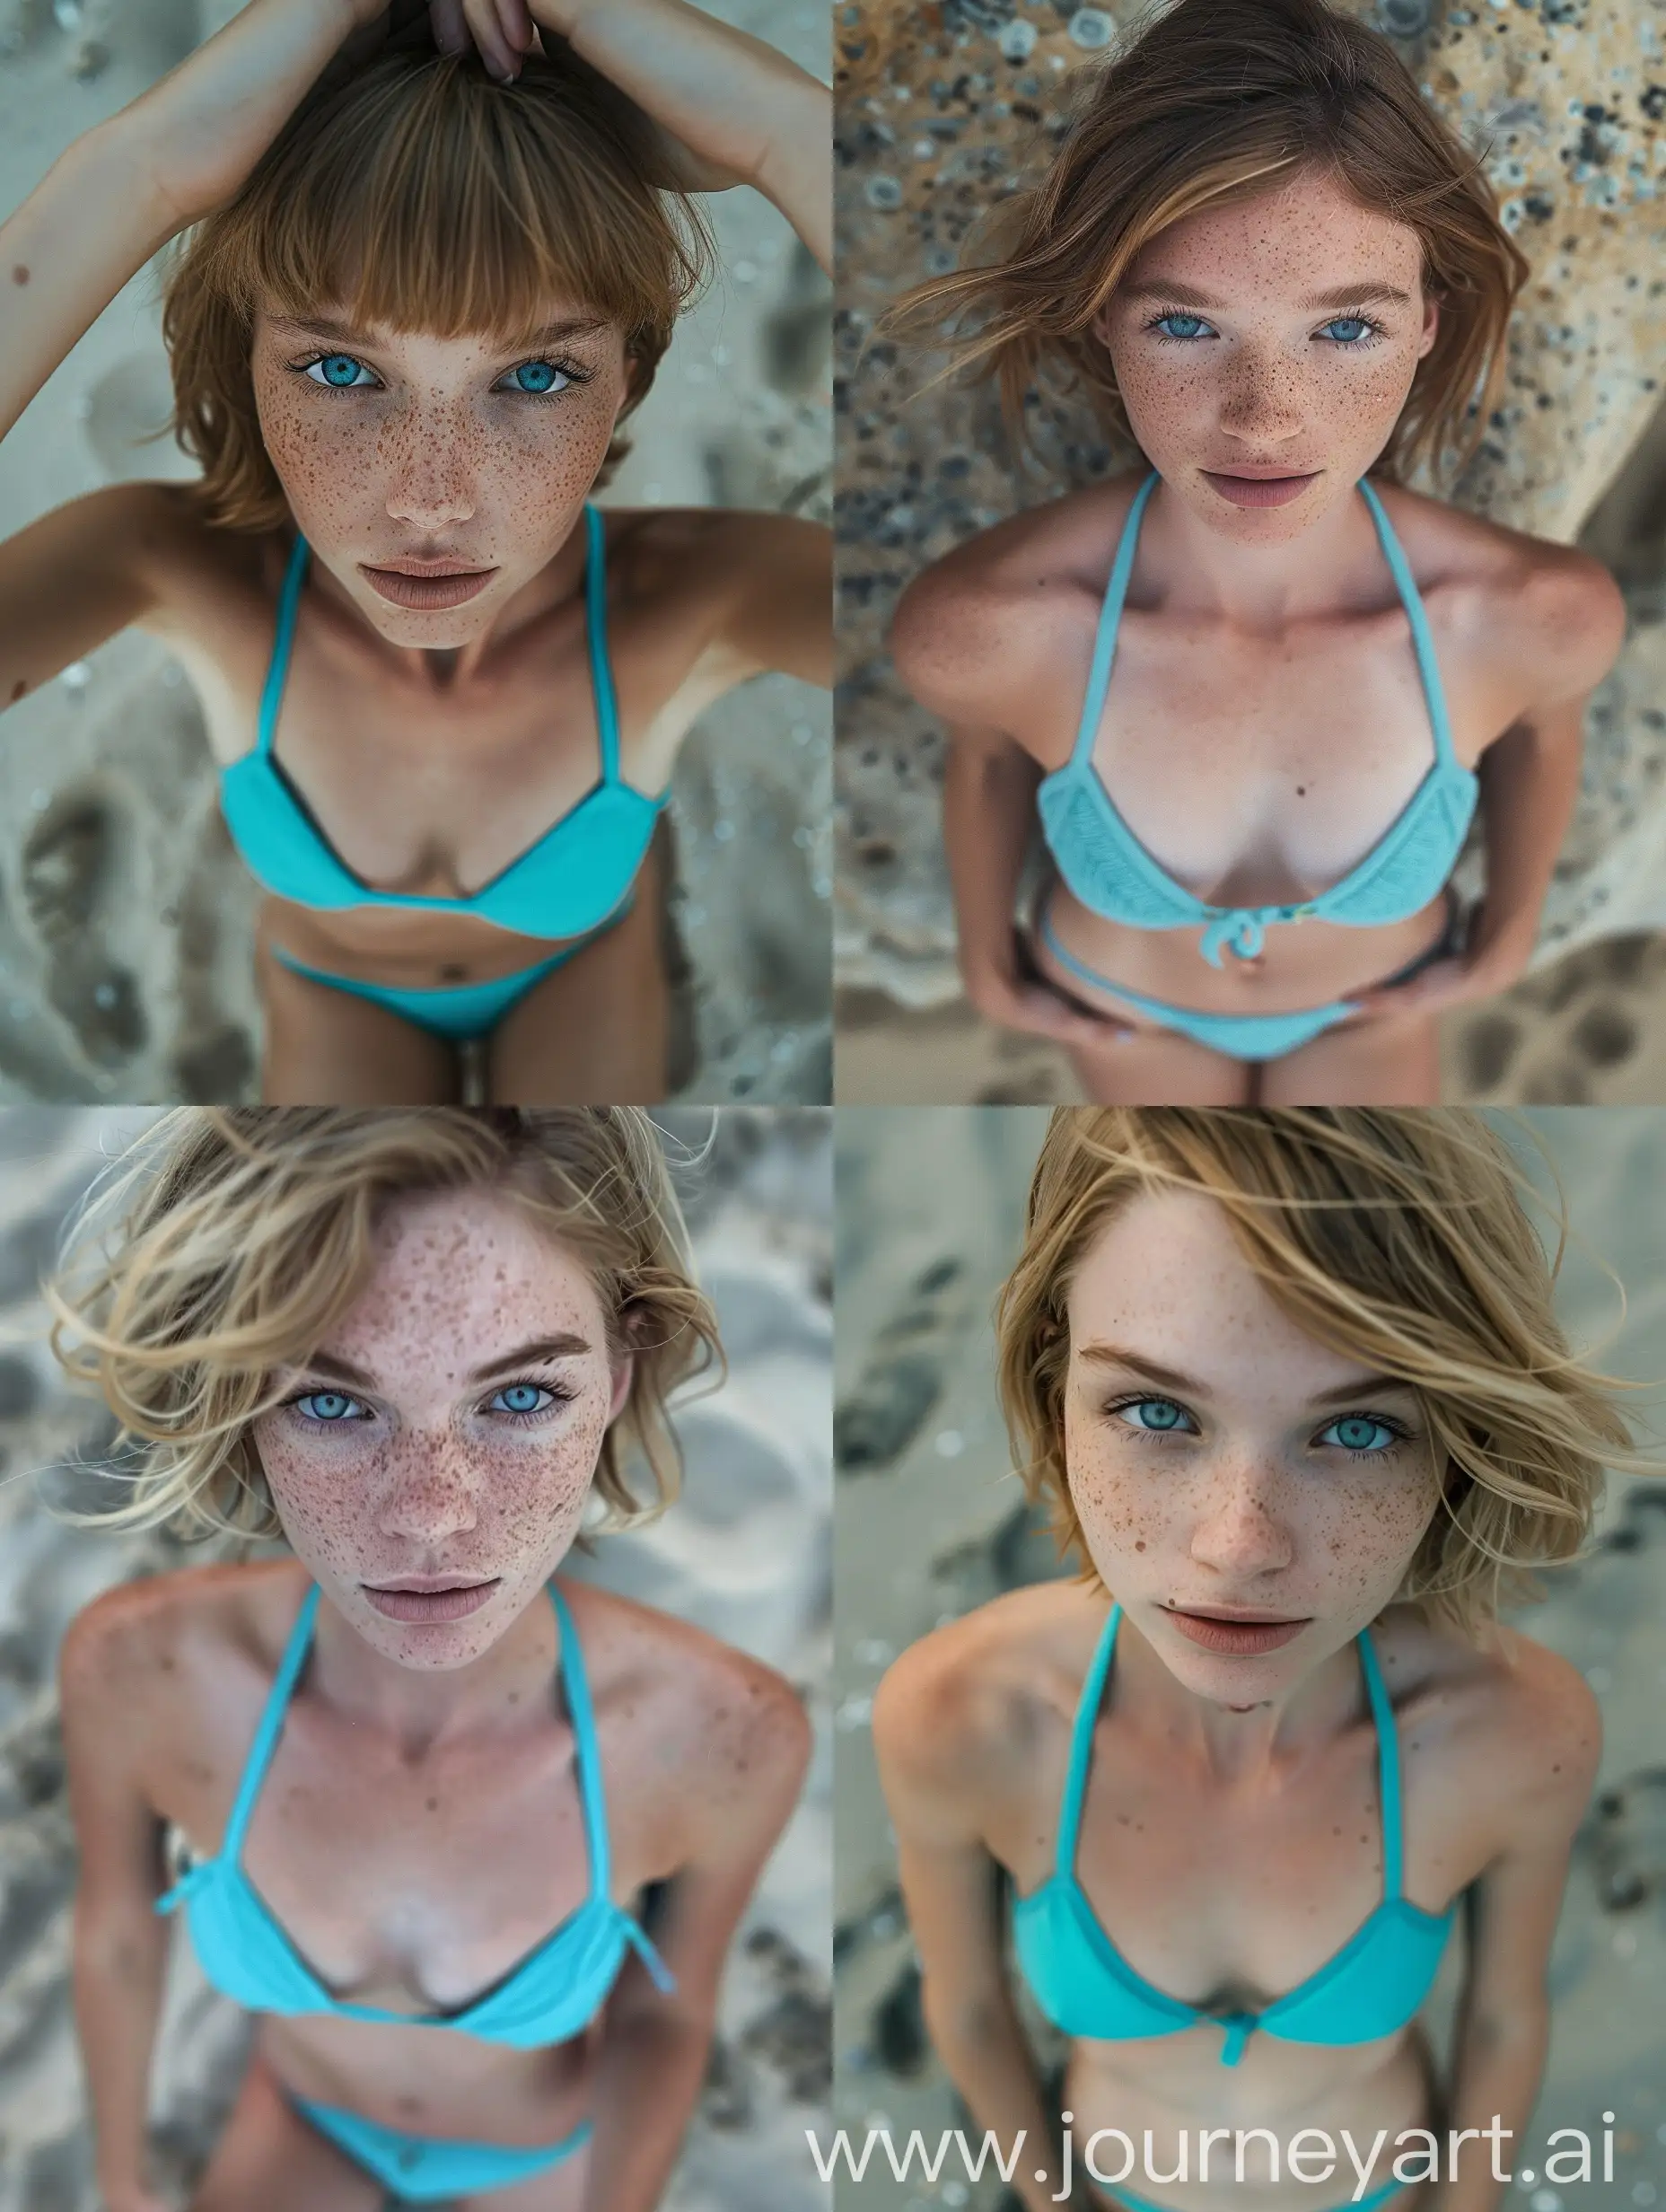 gorgeous cute model with wider blue eyes, some freckles, wearing blue bikini, posing on beach, angular germanic face, short chin length blonde hair with black highlights, super skinny, posing eye contact, full body shot, view from above